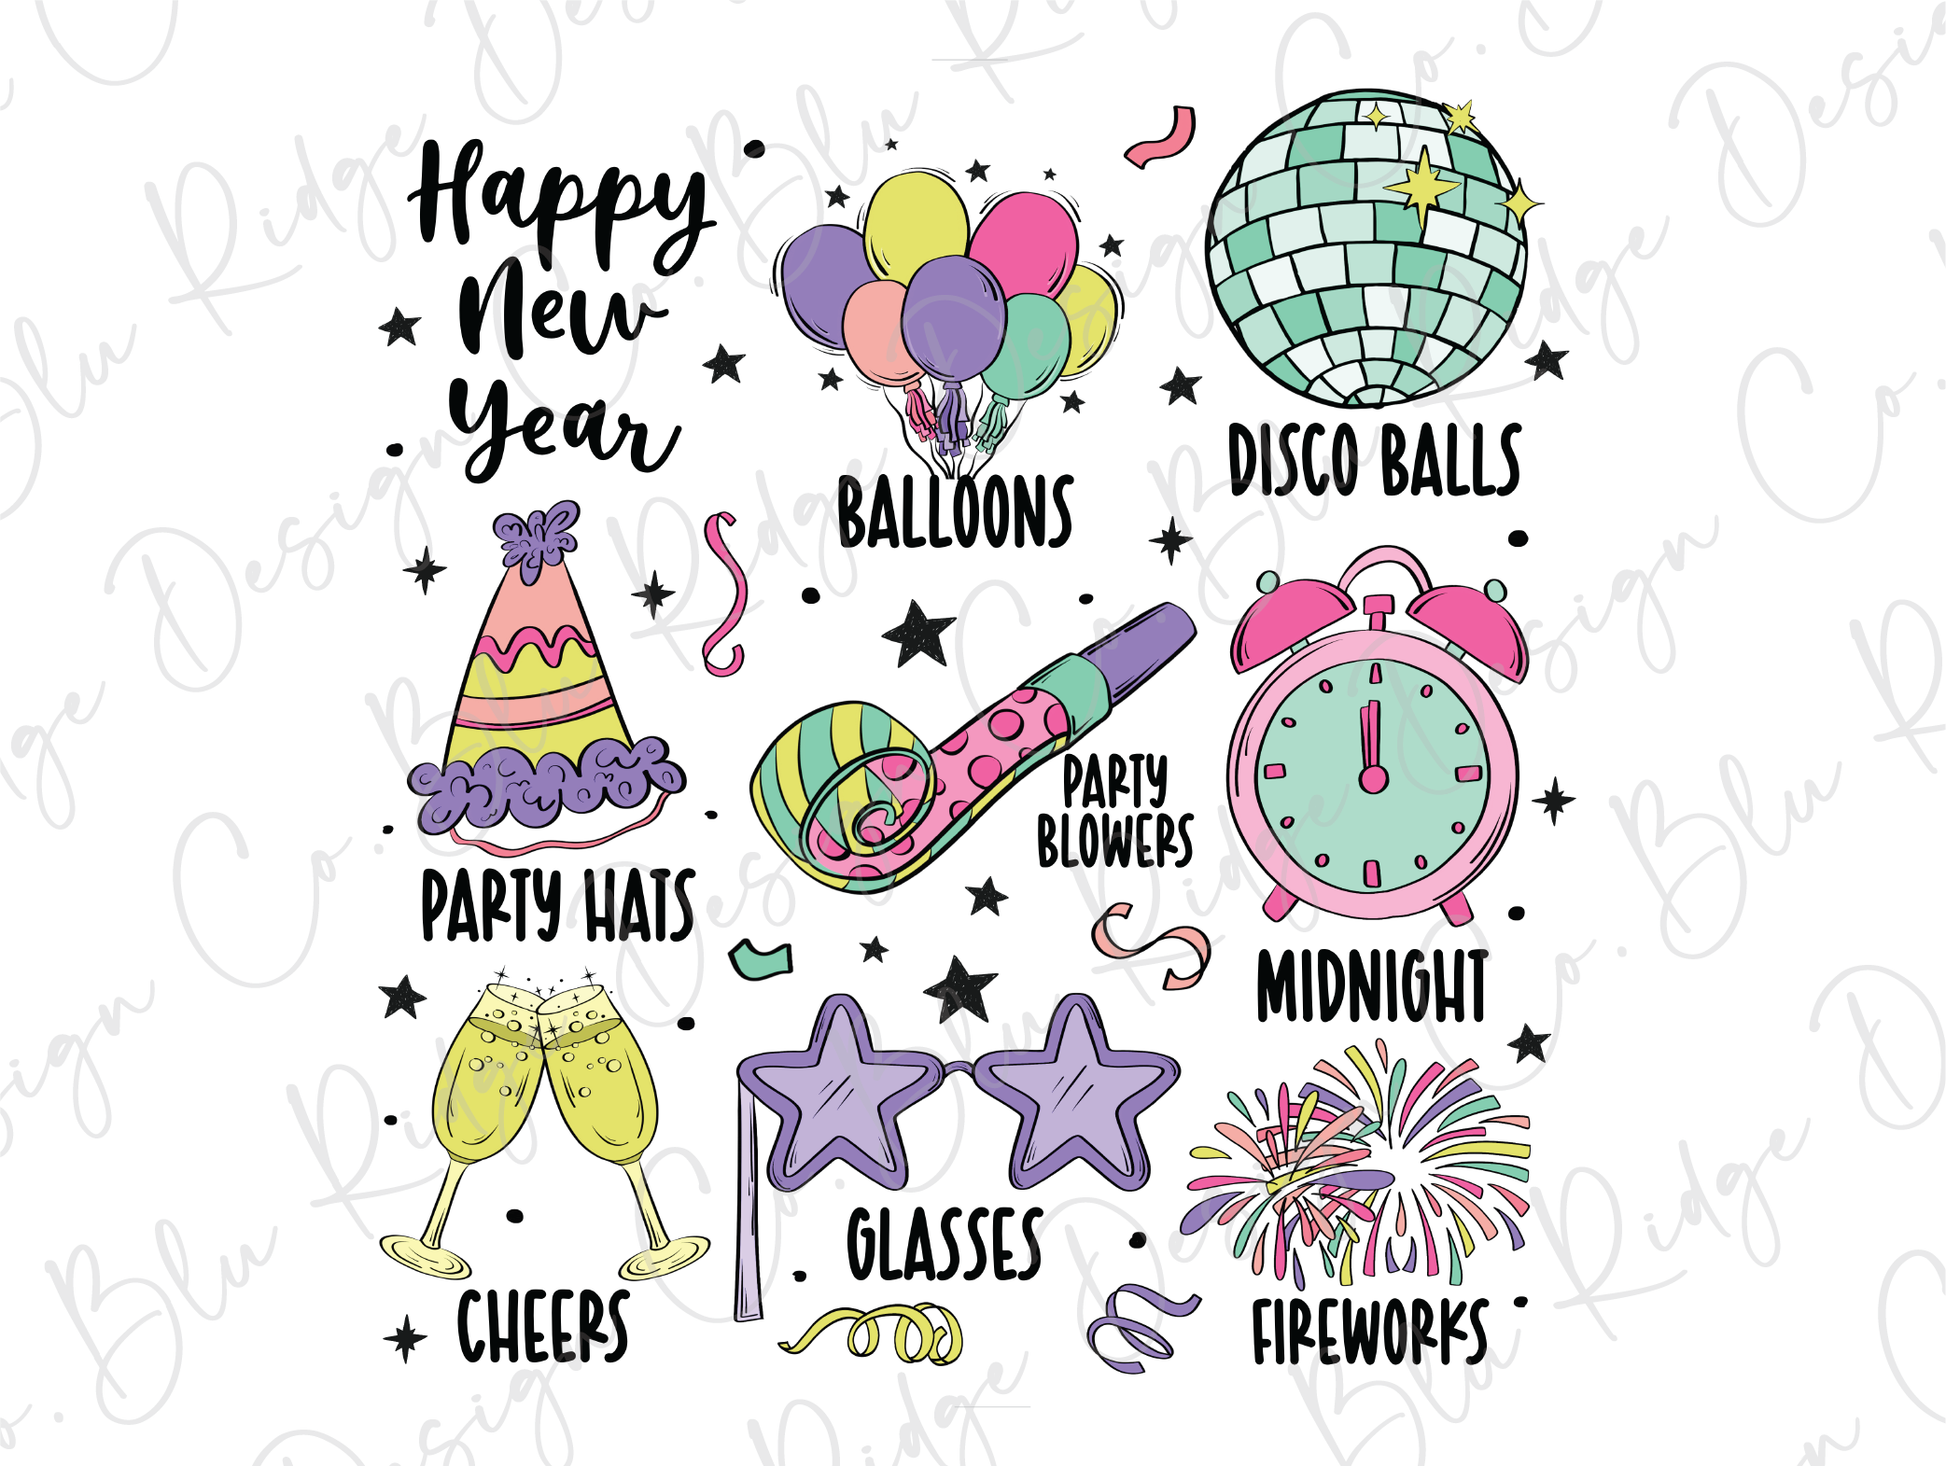 a happy new year clipart with balloons, balloons, stars, and a clock